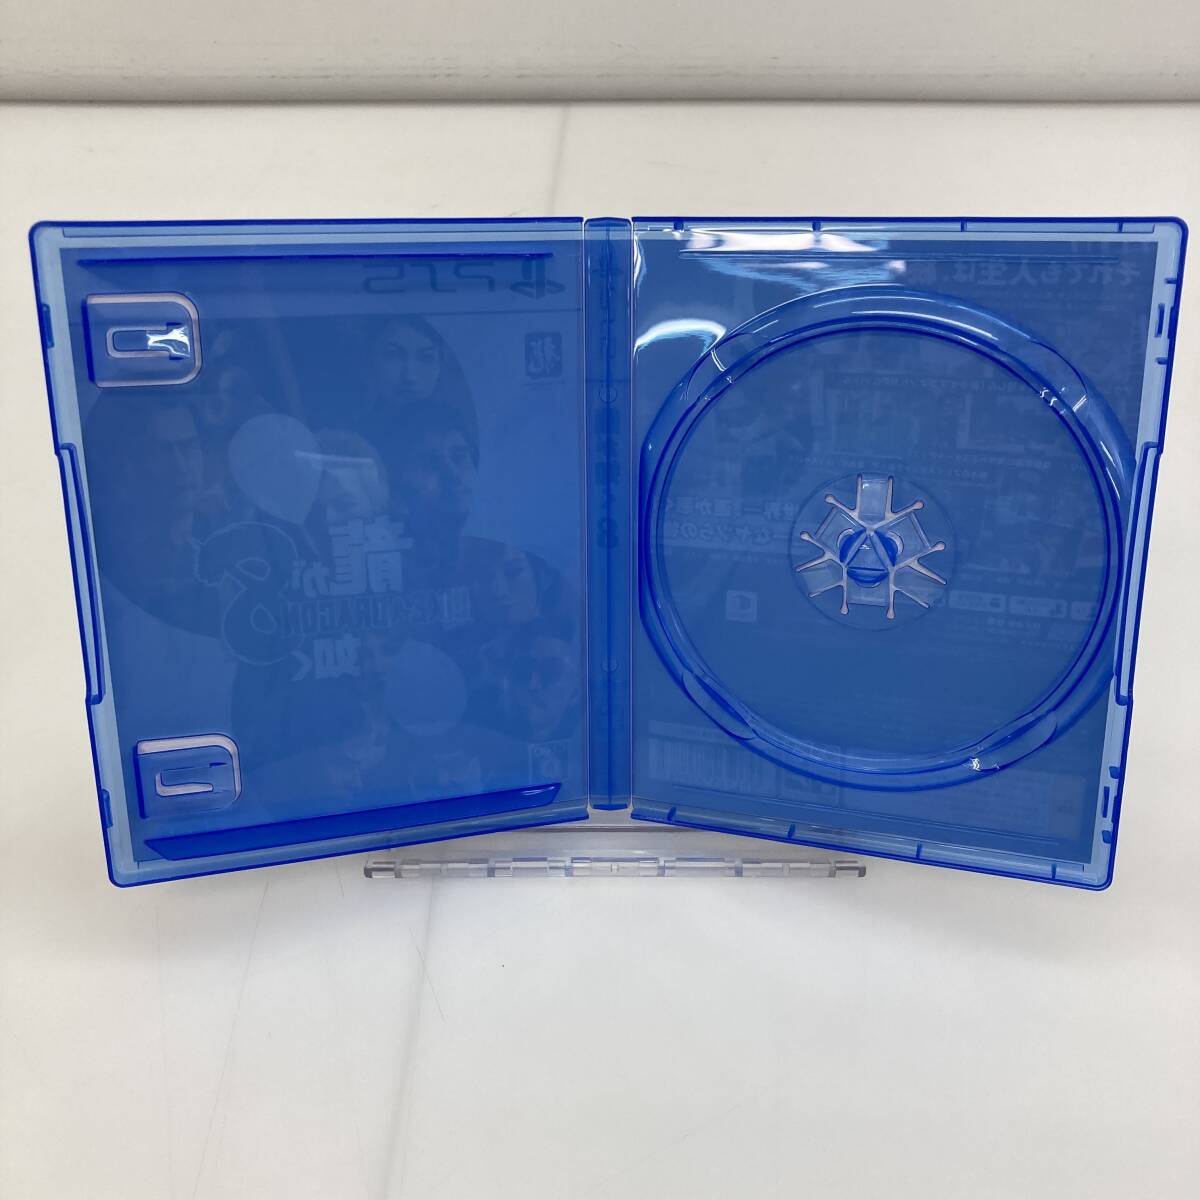 T No.4772 ★1円～【PS5 ソフト】プレイステーション5 PlayStation5 ソフト 龍が如く8 中古品 ◎レターパック発送可◎の画像6